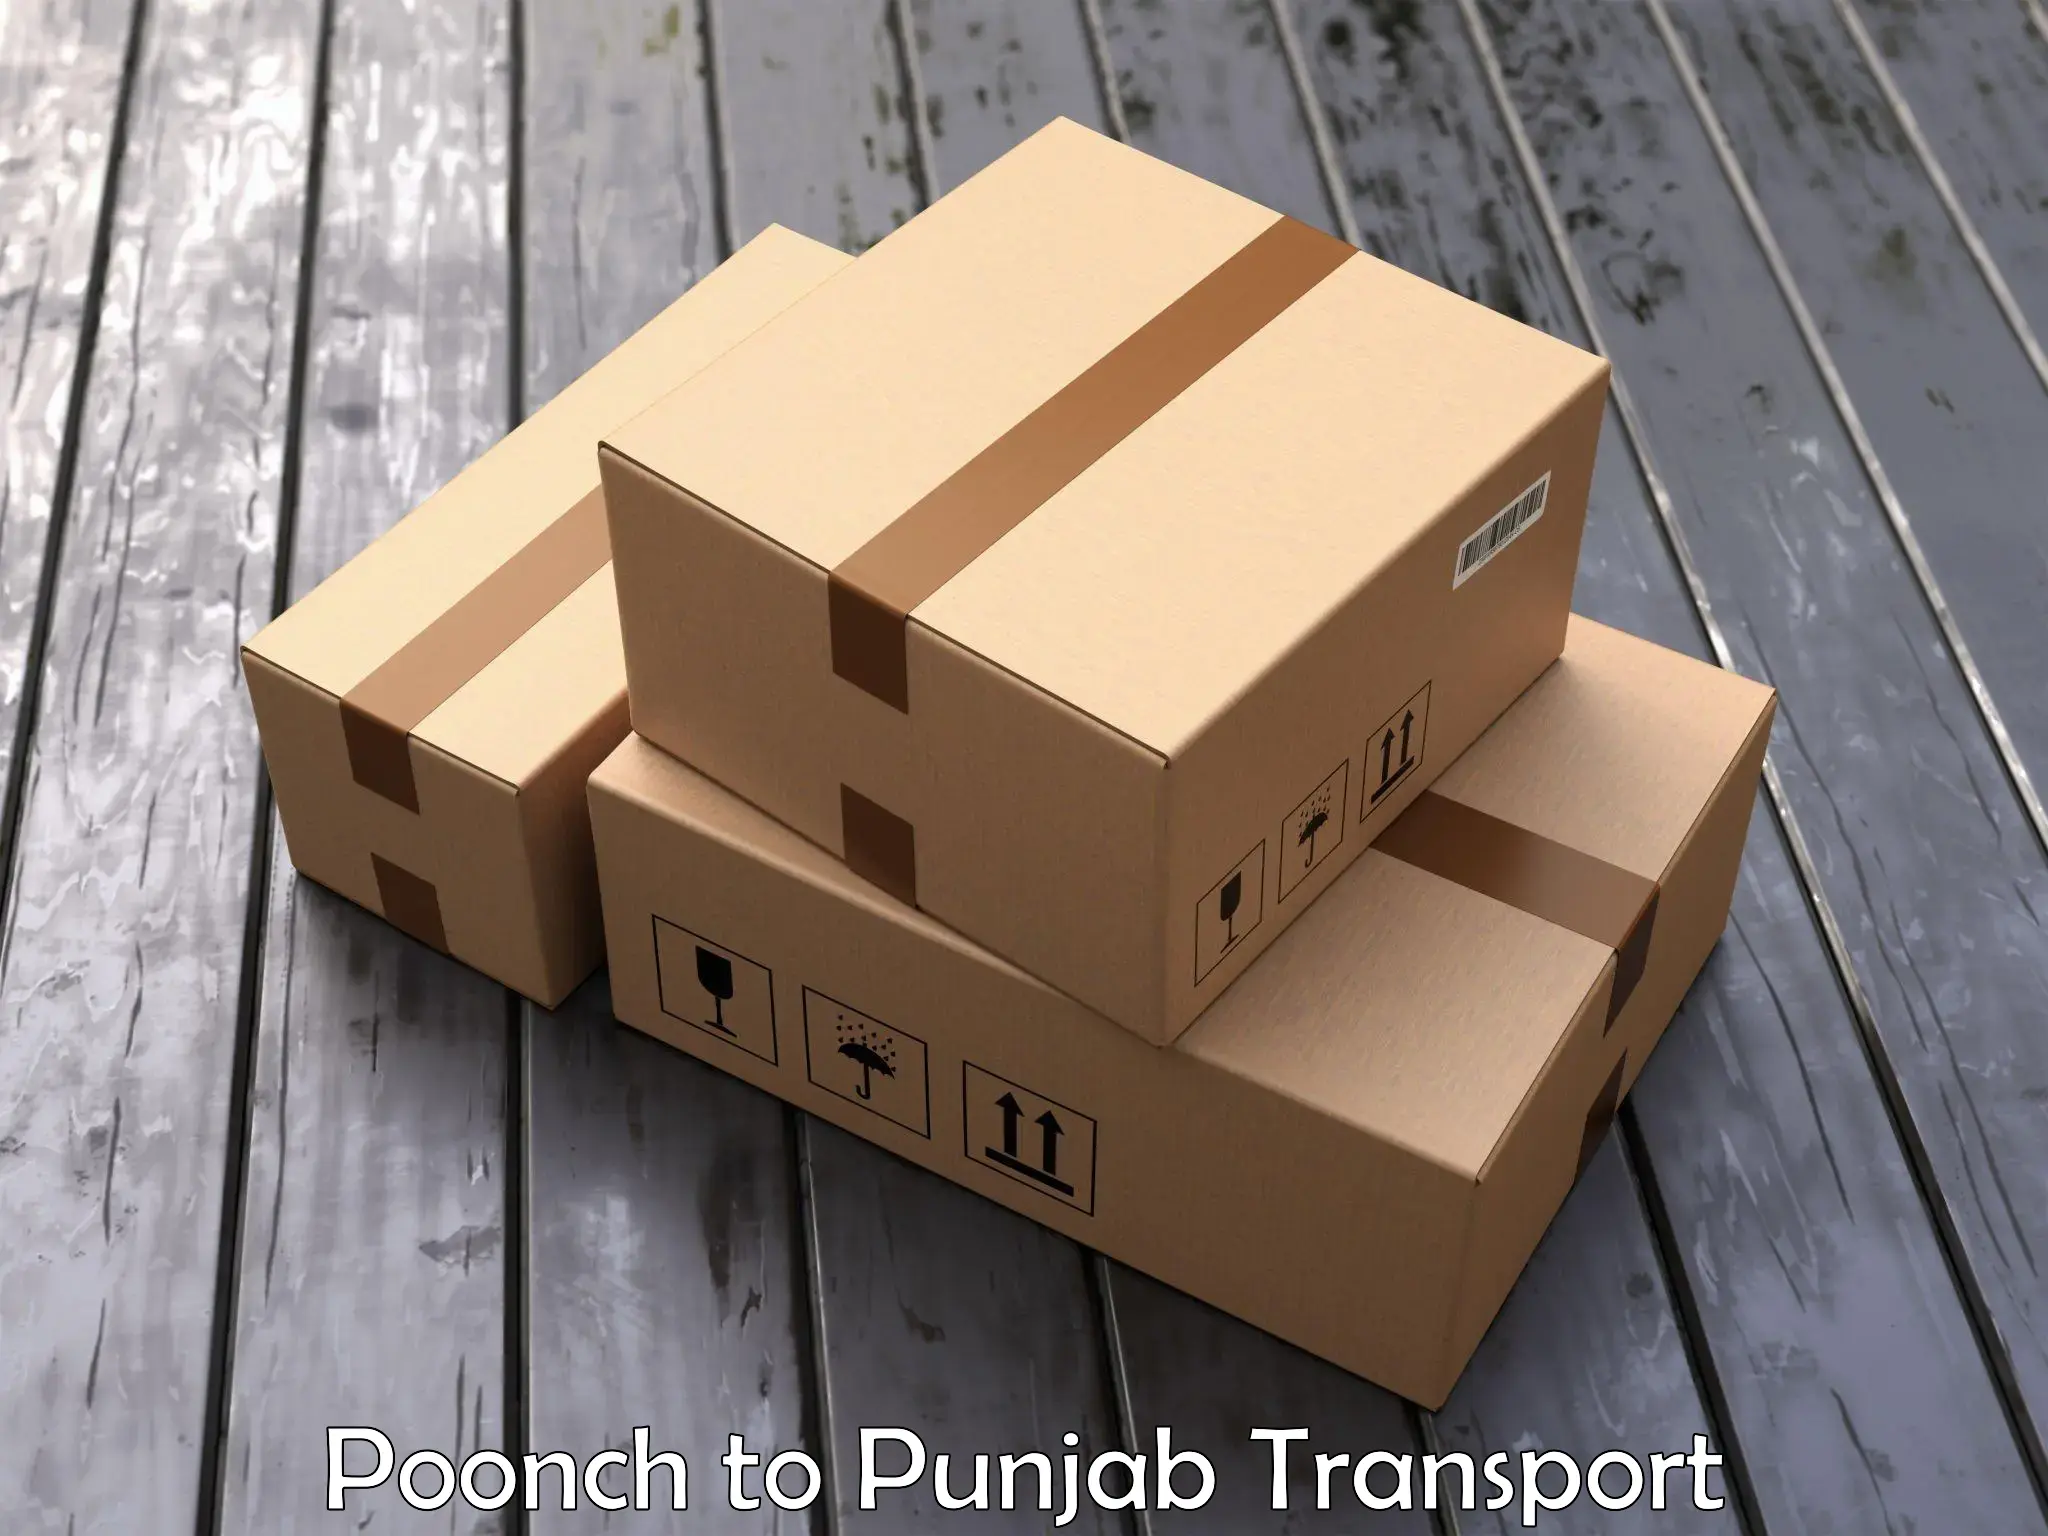 Container transport service Poonch to Punjab